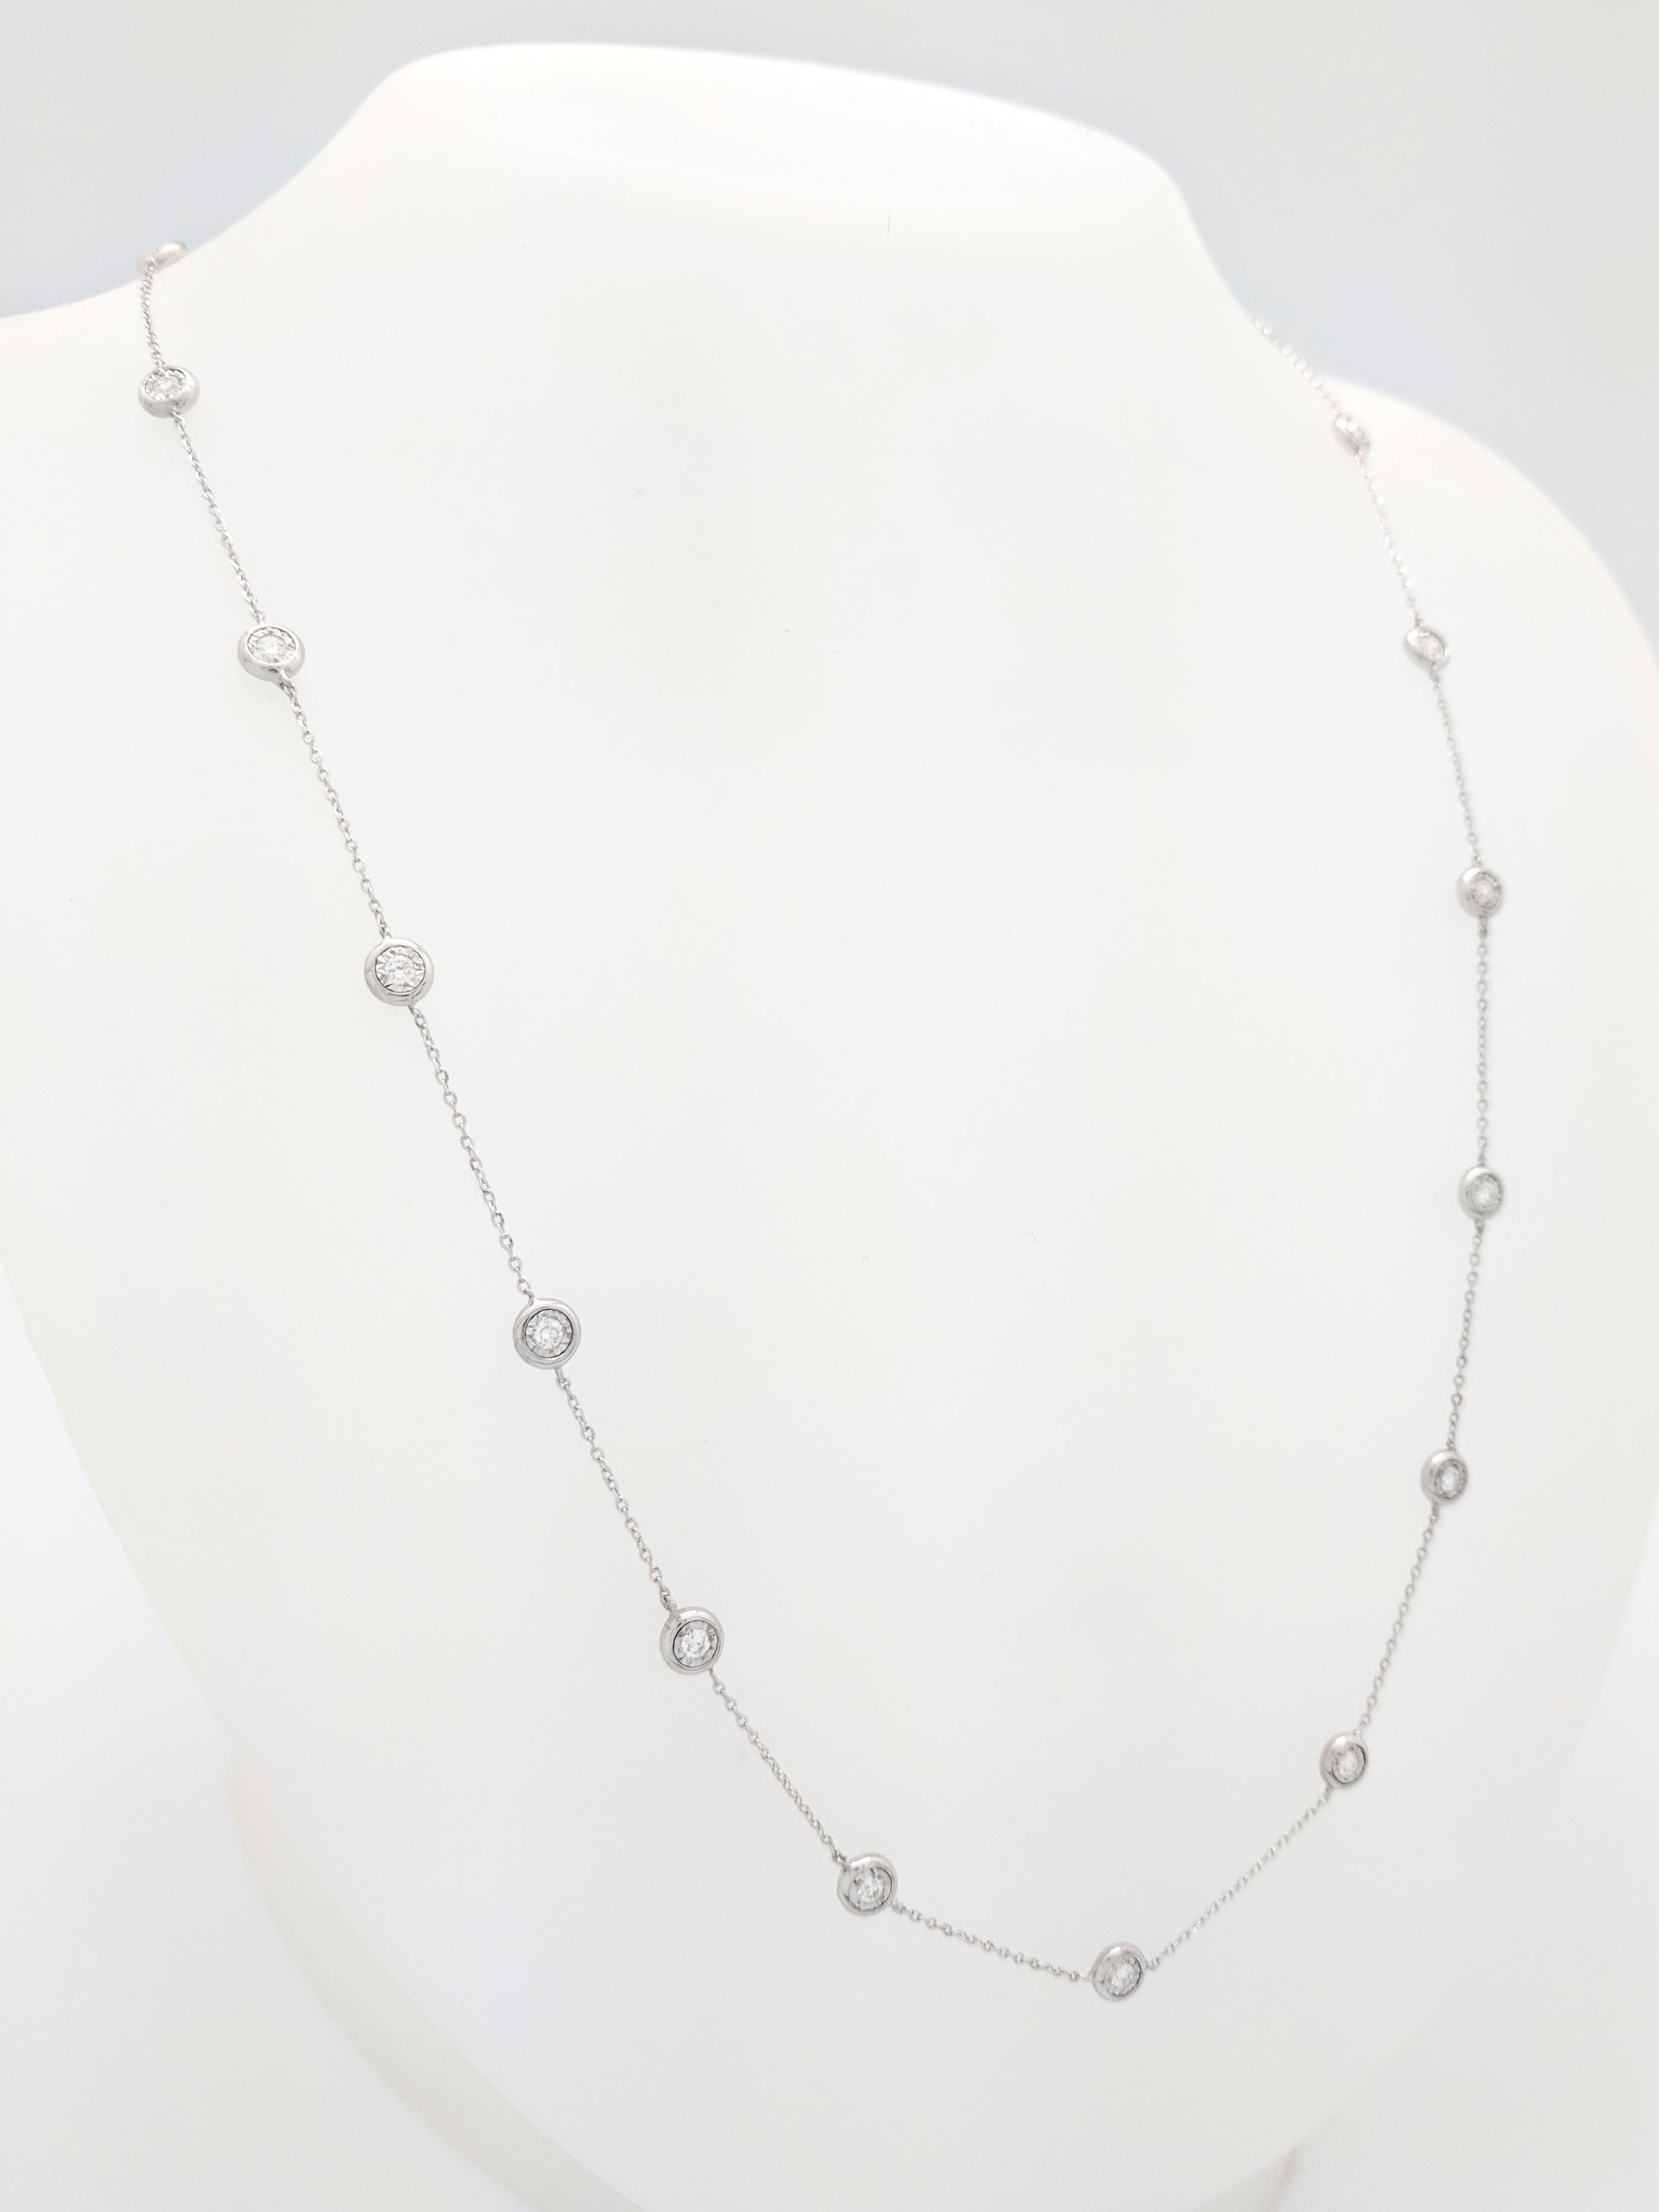 You are viewing a Stunning Diamond By The Yard Necklace. The necklace is crafted from 14k white gold and weighs 5.9 grams. It features twenty-one bezel set round brilliant diamond for an estimated .93tcw. The diamonds range from G-H in color and are